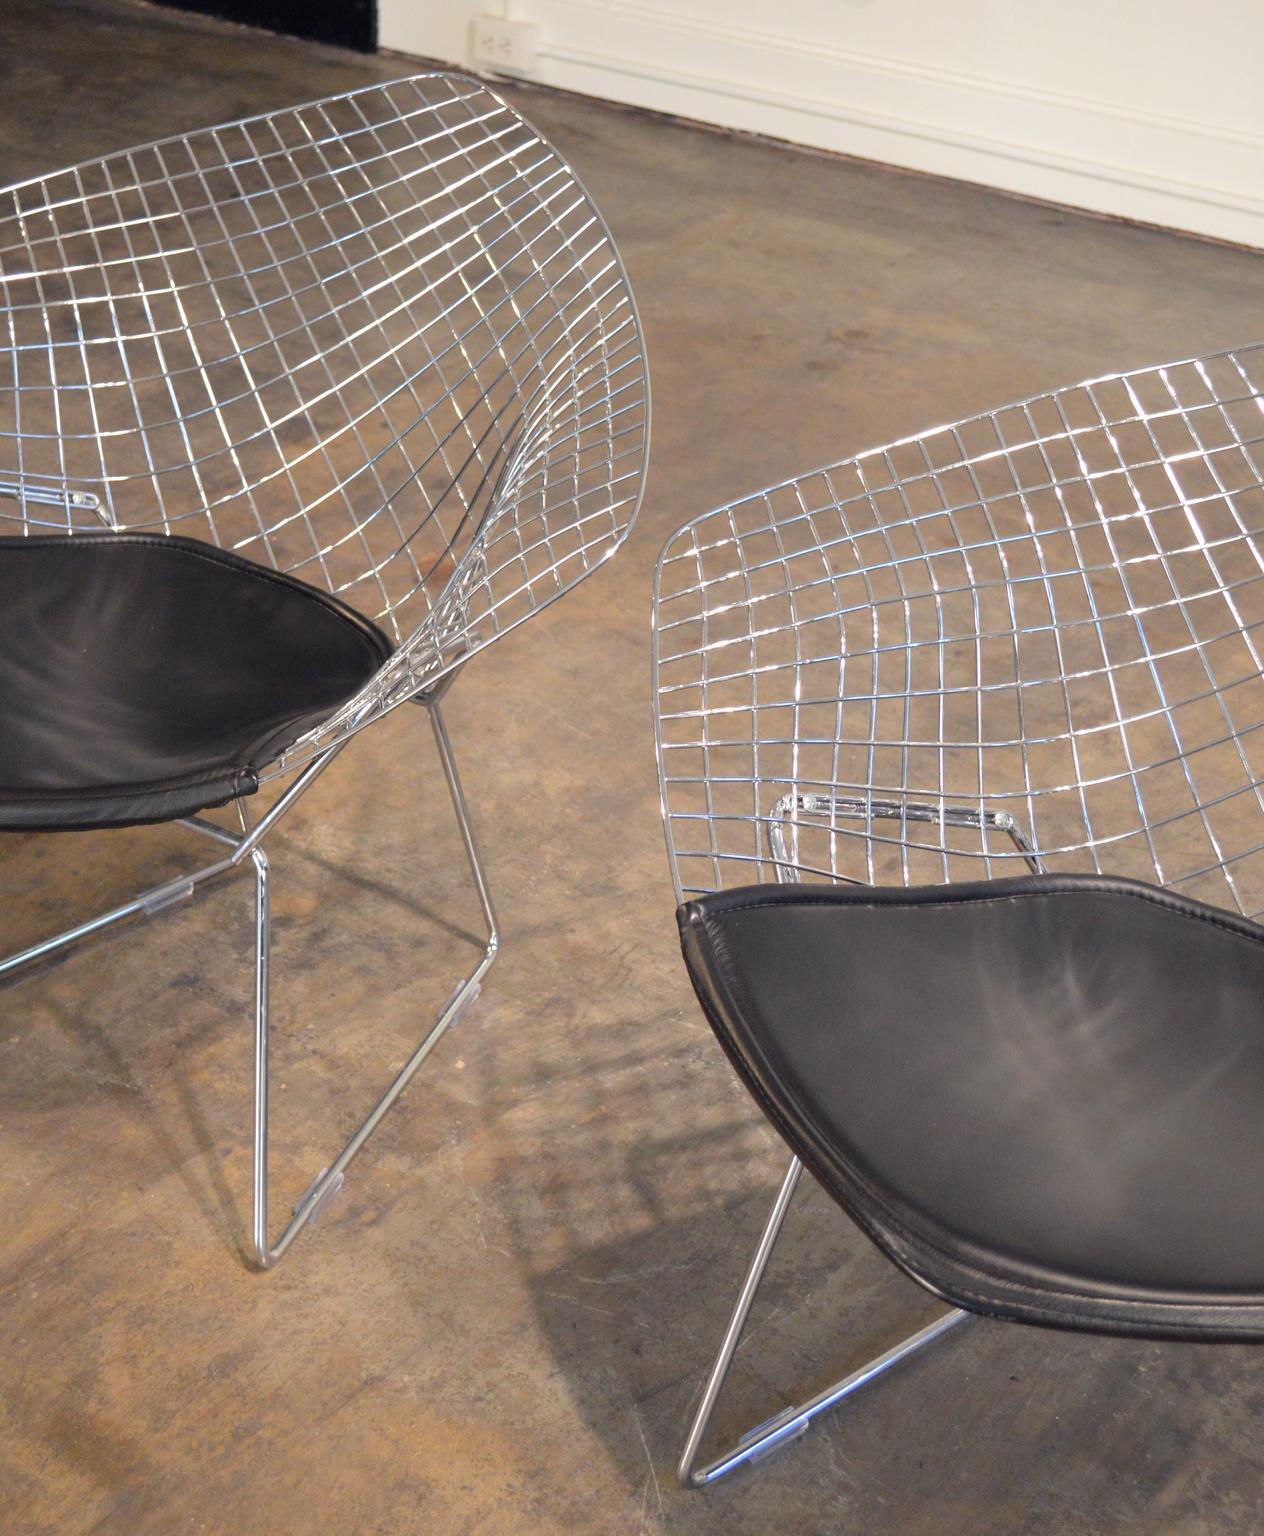 Welded Harry Bertoia Chrome Diamond Chairs by Knoll with Black Seat Covers